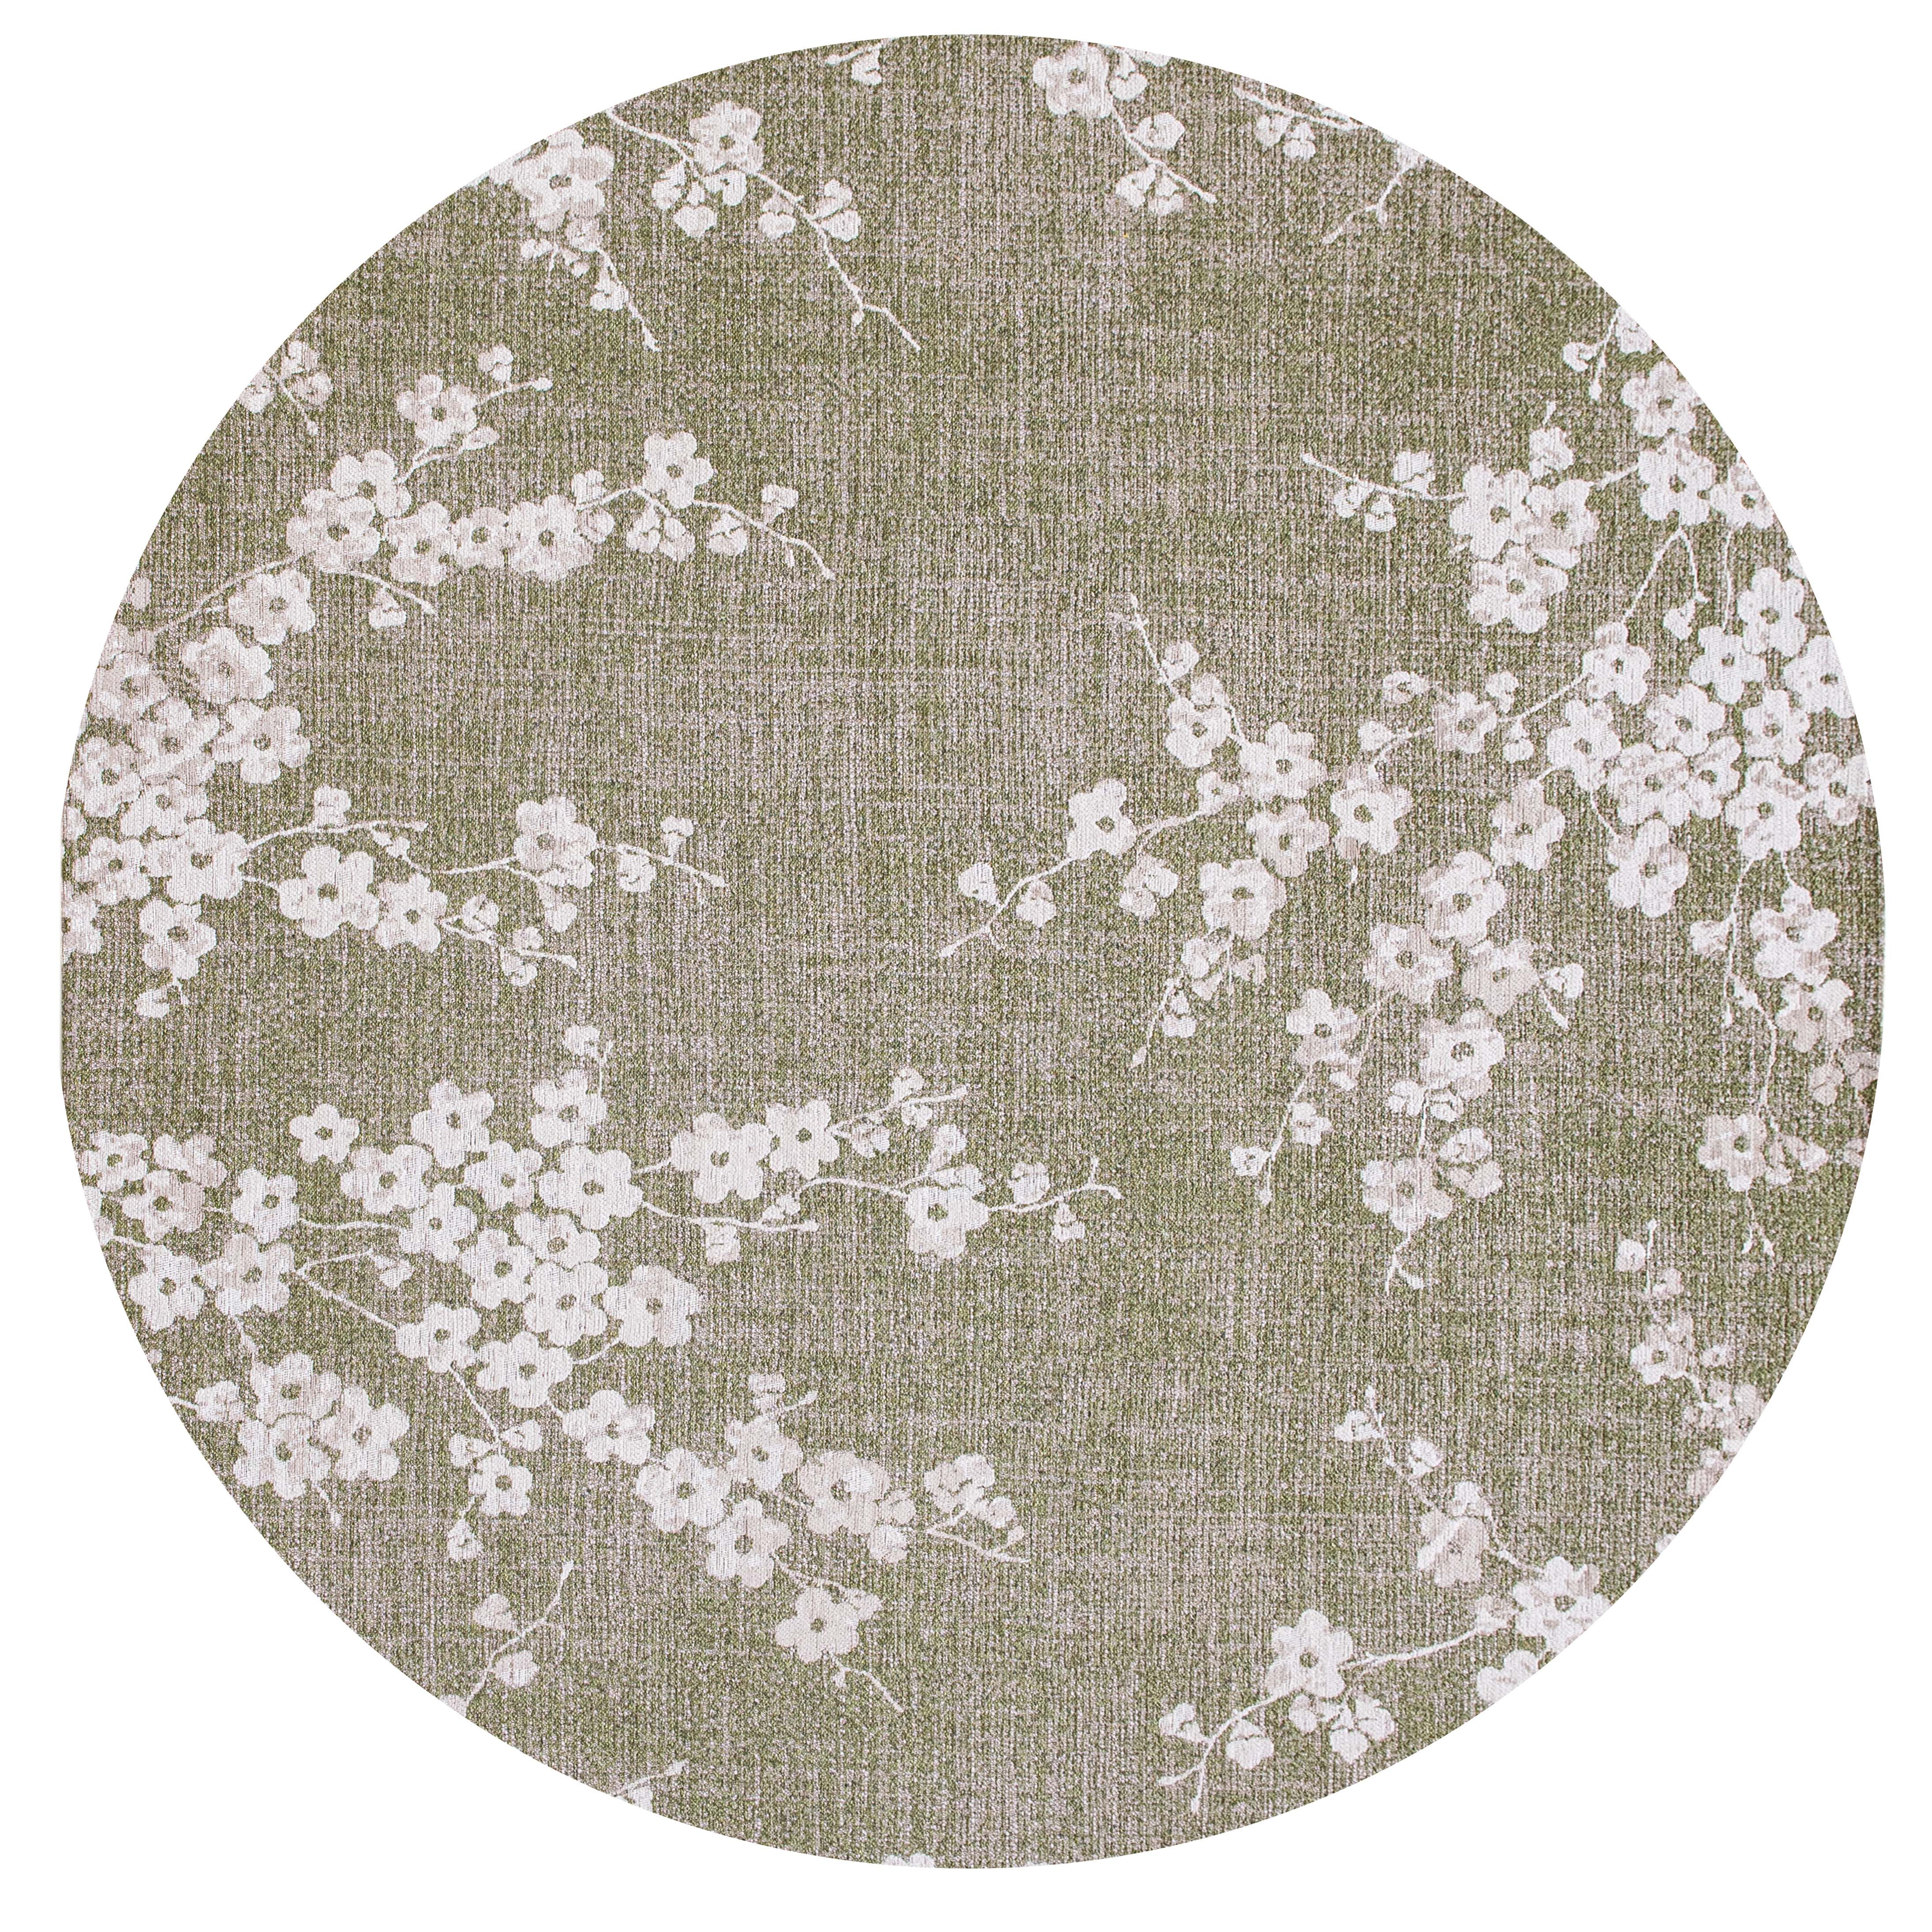 Modern abstract circle rug with subtle green floral pattern